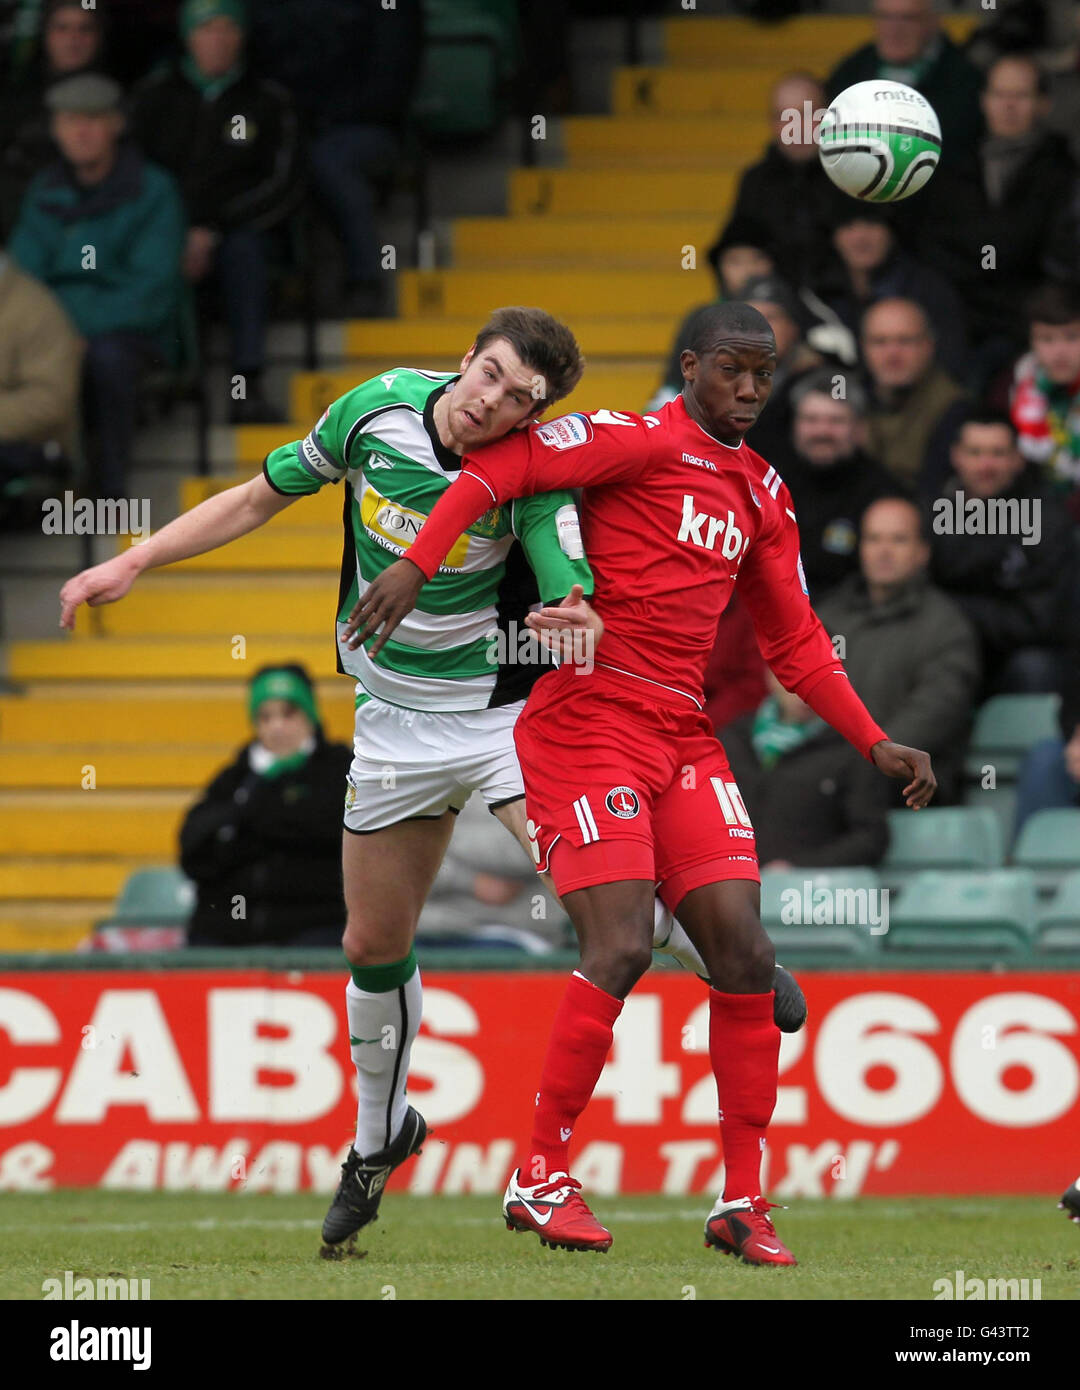 Charlton Athletic's Bradley Wright-Phillips and Yeovil Town's Paul Huntington battle for the ball during the Npower Football League One match at Huish Park, Yeovil. Stock Photo